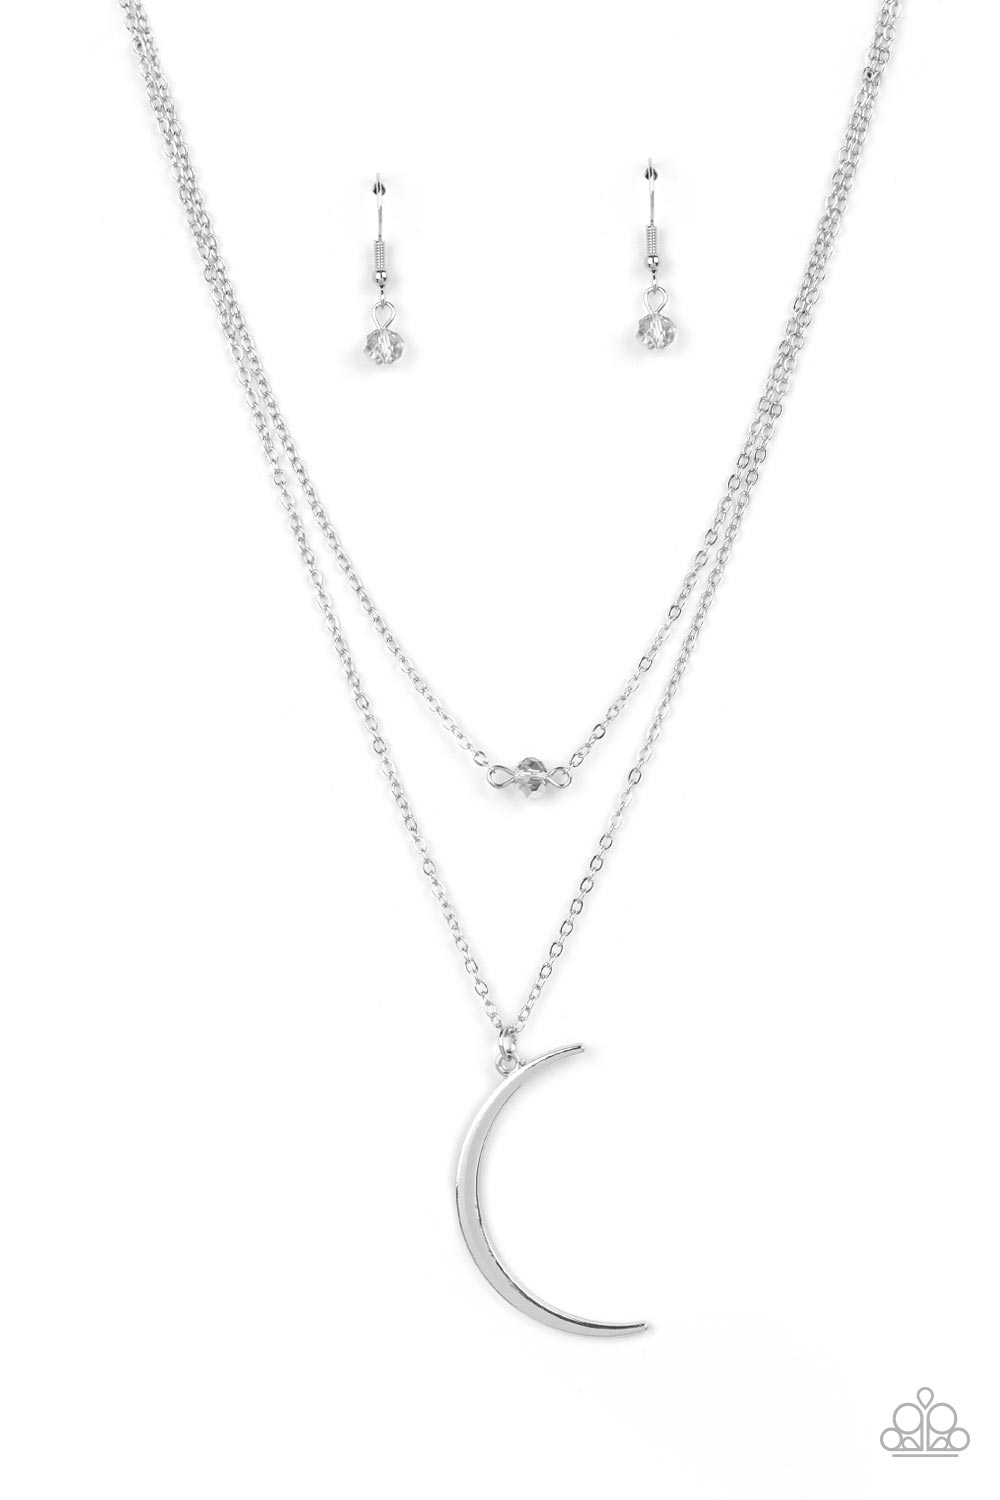 Paparazzi Accessories - Modern Moonbeam - Silver Moon Necklaces two dainty silver chains delicately layer below the collar. A metallic crystal-like bead sparkles at the center of the uppermost chain while a silver half moon pendant swings from the bottom of the display for a mystical finish. Features an adjustable clasp closure.  Sold as one individual necklace. Includes one pair of matching earrings.